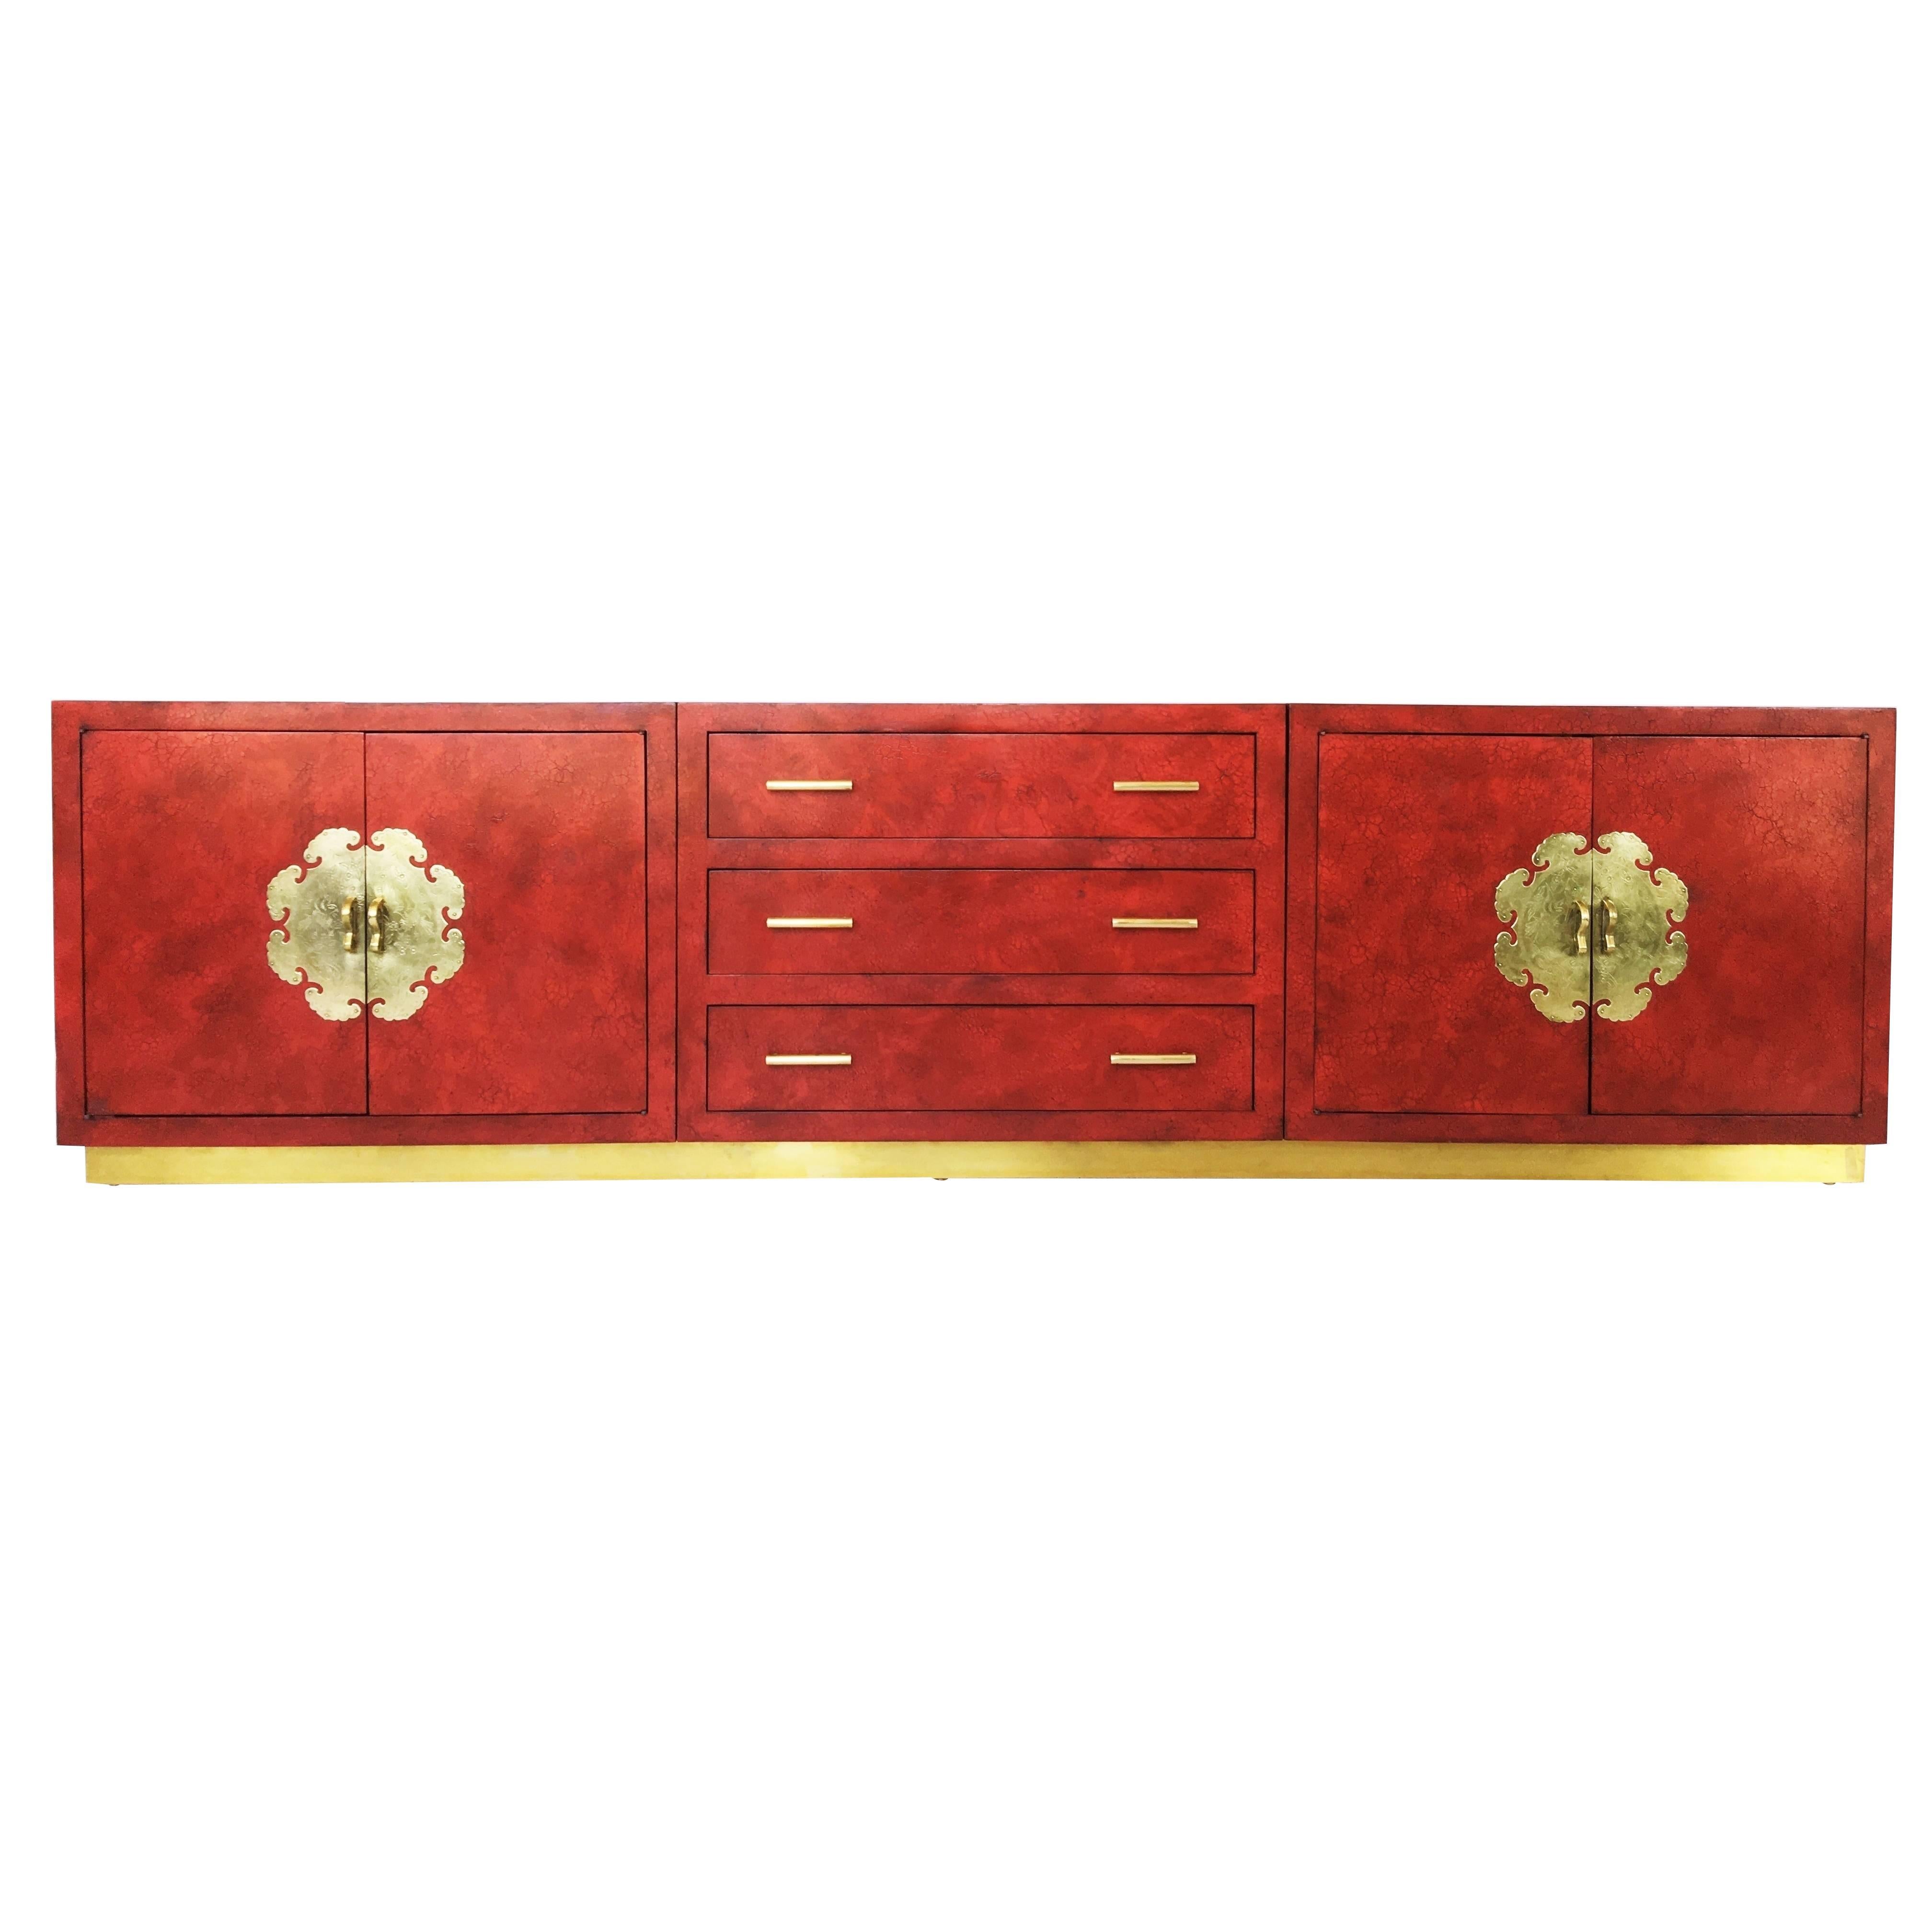 Stunning Chinoiserie Asian Style Red Lacquer and Brass Sideboard or Credenza For Sale